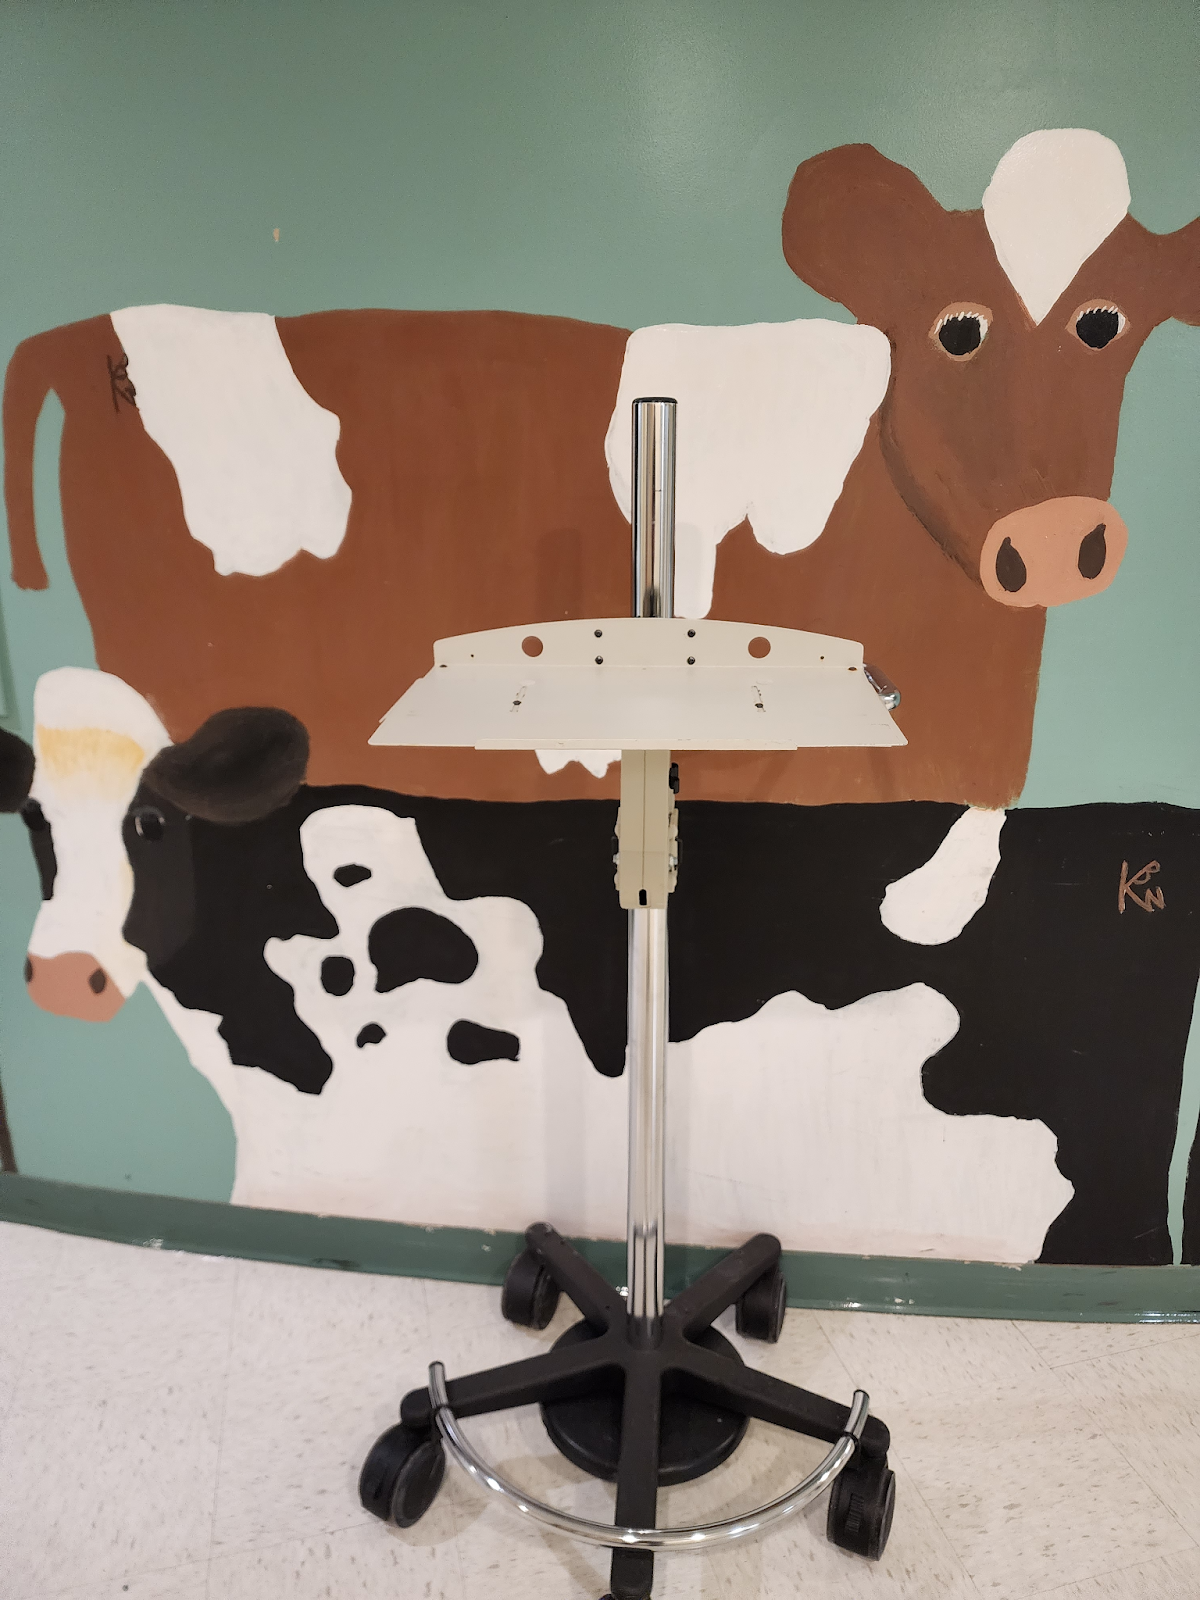 cows painted on the wall, rolling laptop cart in front of the cows